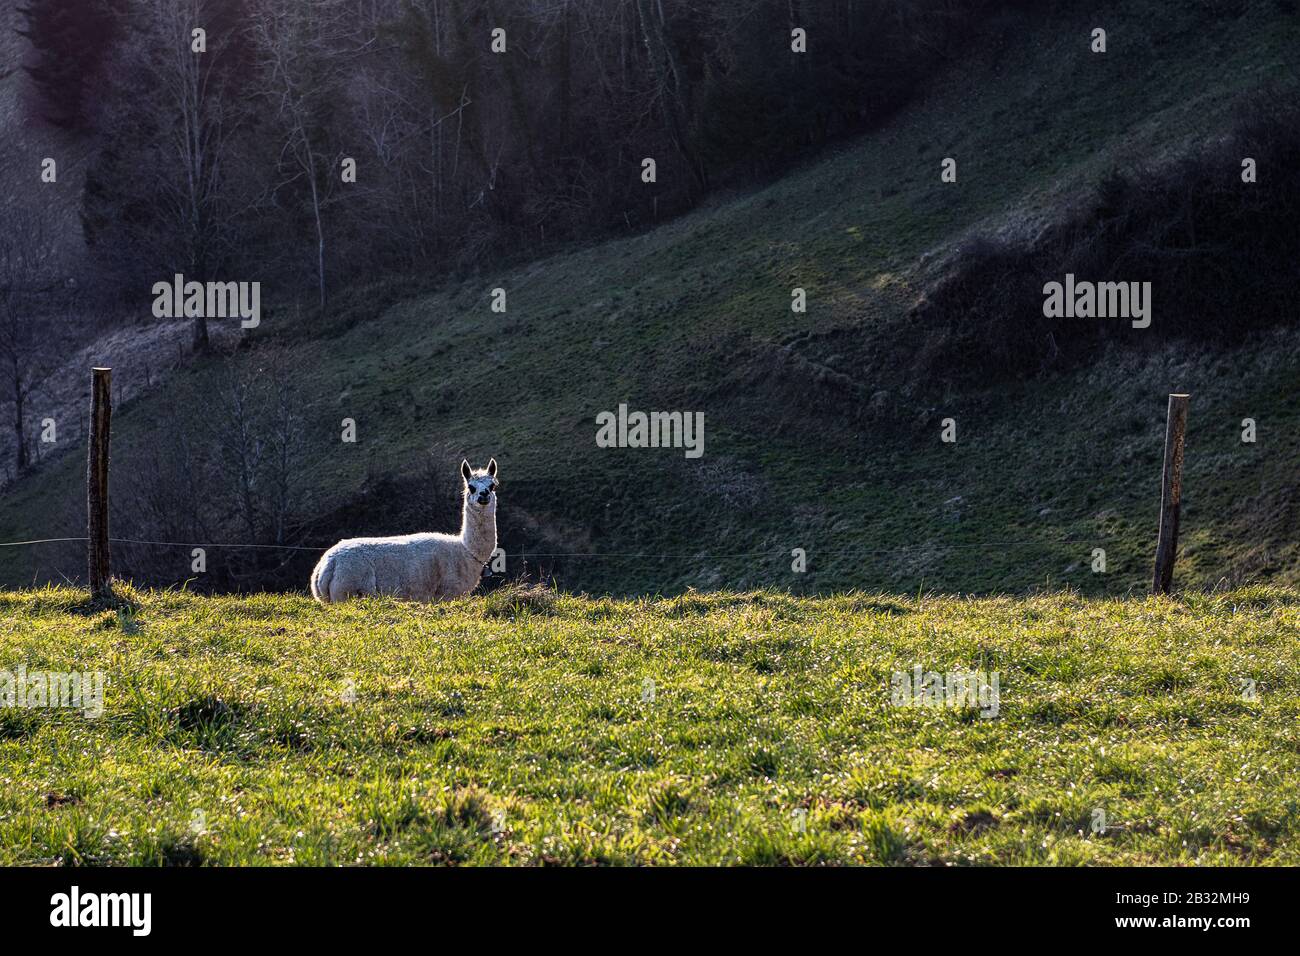 Alternative forms of agriculture are often tried in the hilly hinterland of central Switzerland. This includes breeding alpacas or fallow deer. In a p Stock Photo